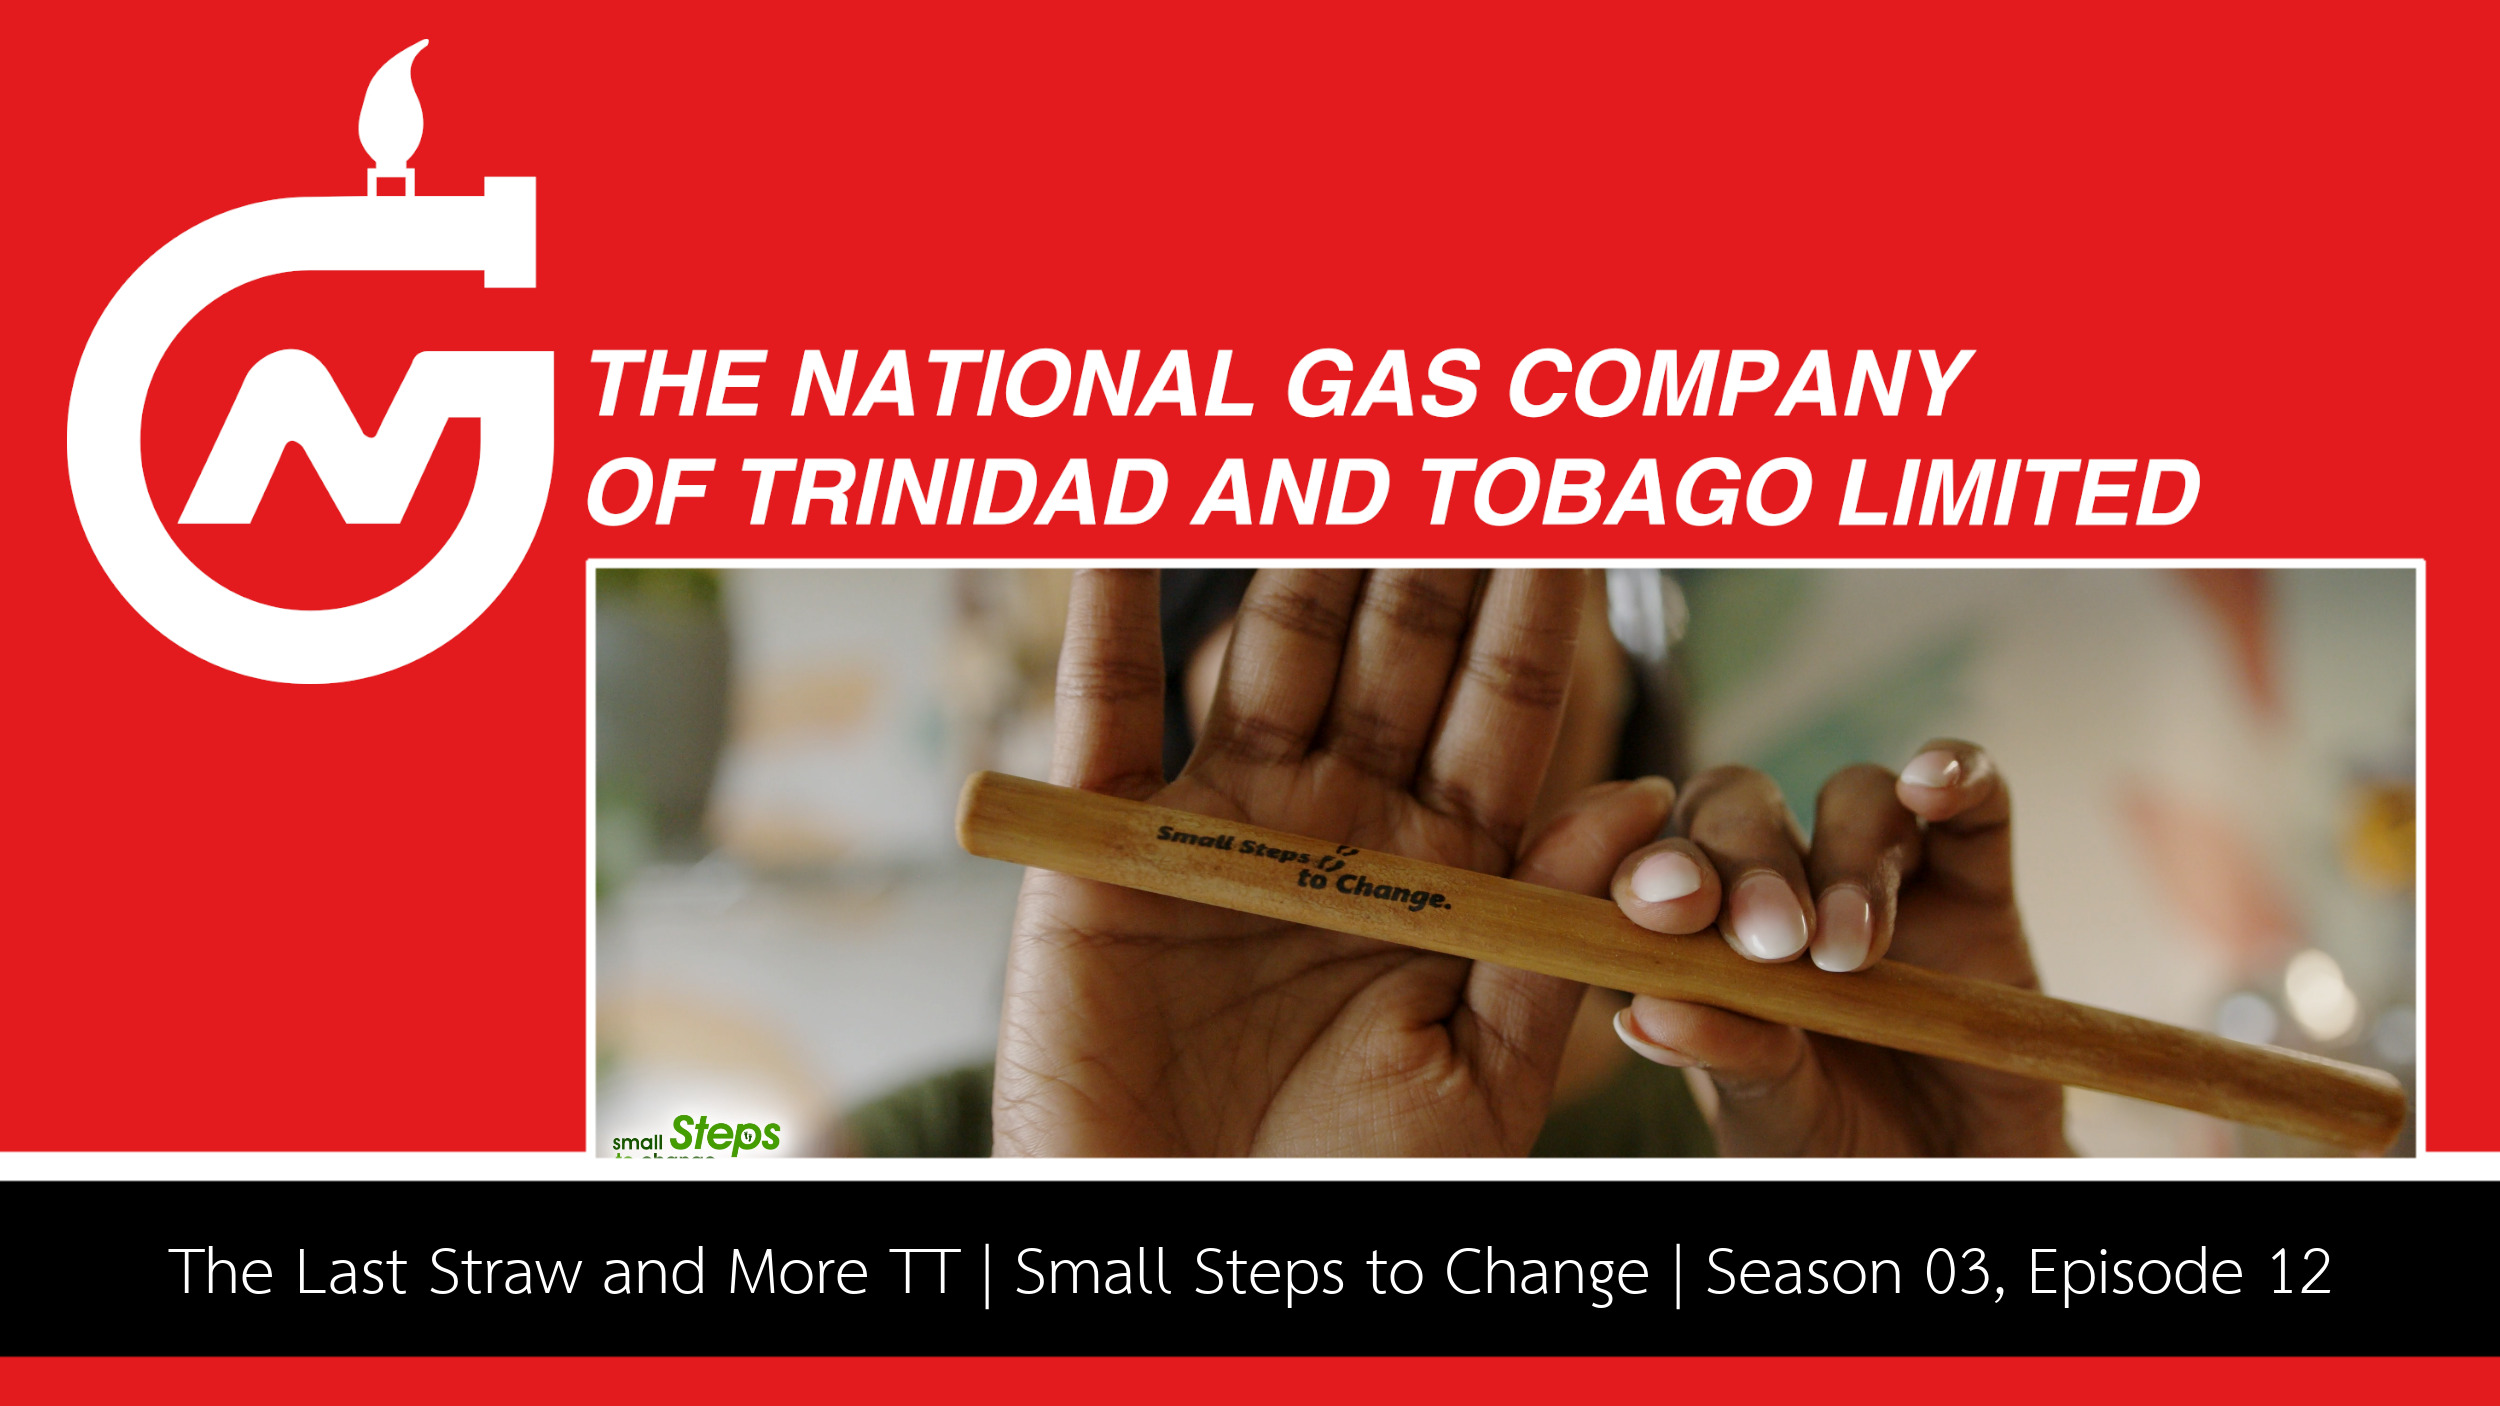 NGC | A hand holding a wooden straw is shown against a blurred background with the text "Small Steps to Change," reminiscent of a TV Series tagline. The National Gas Company of Trinidad and Tobago Limited logo is present.